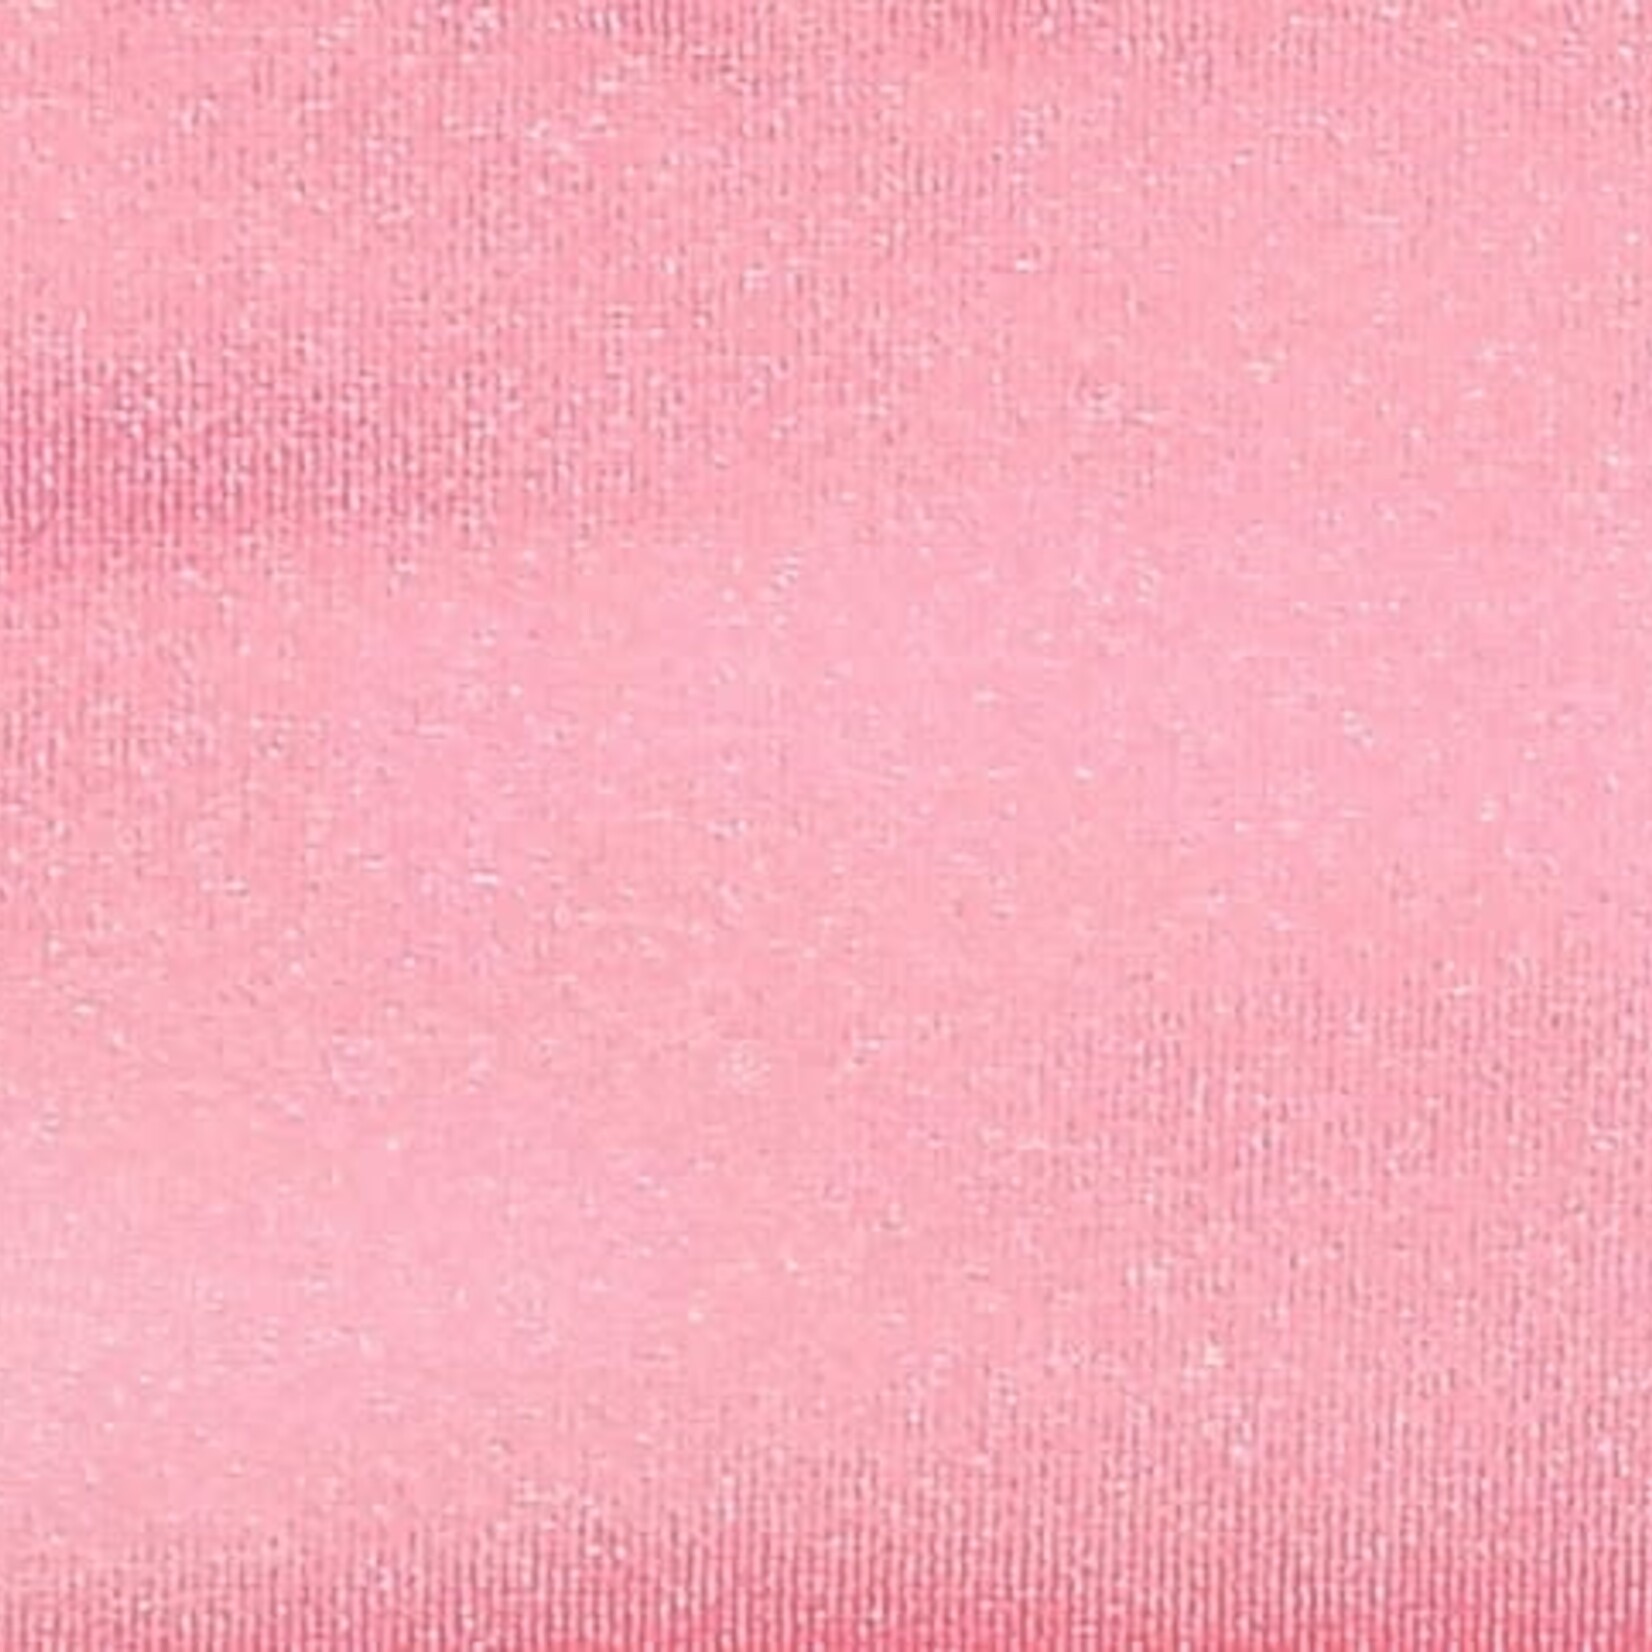 Plain Spandex 58-60 Inches (yard) Baby Pink